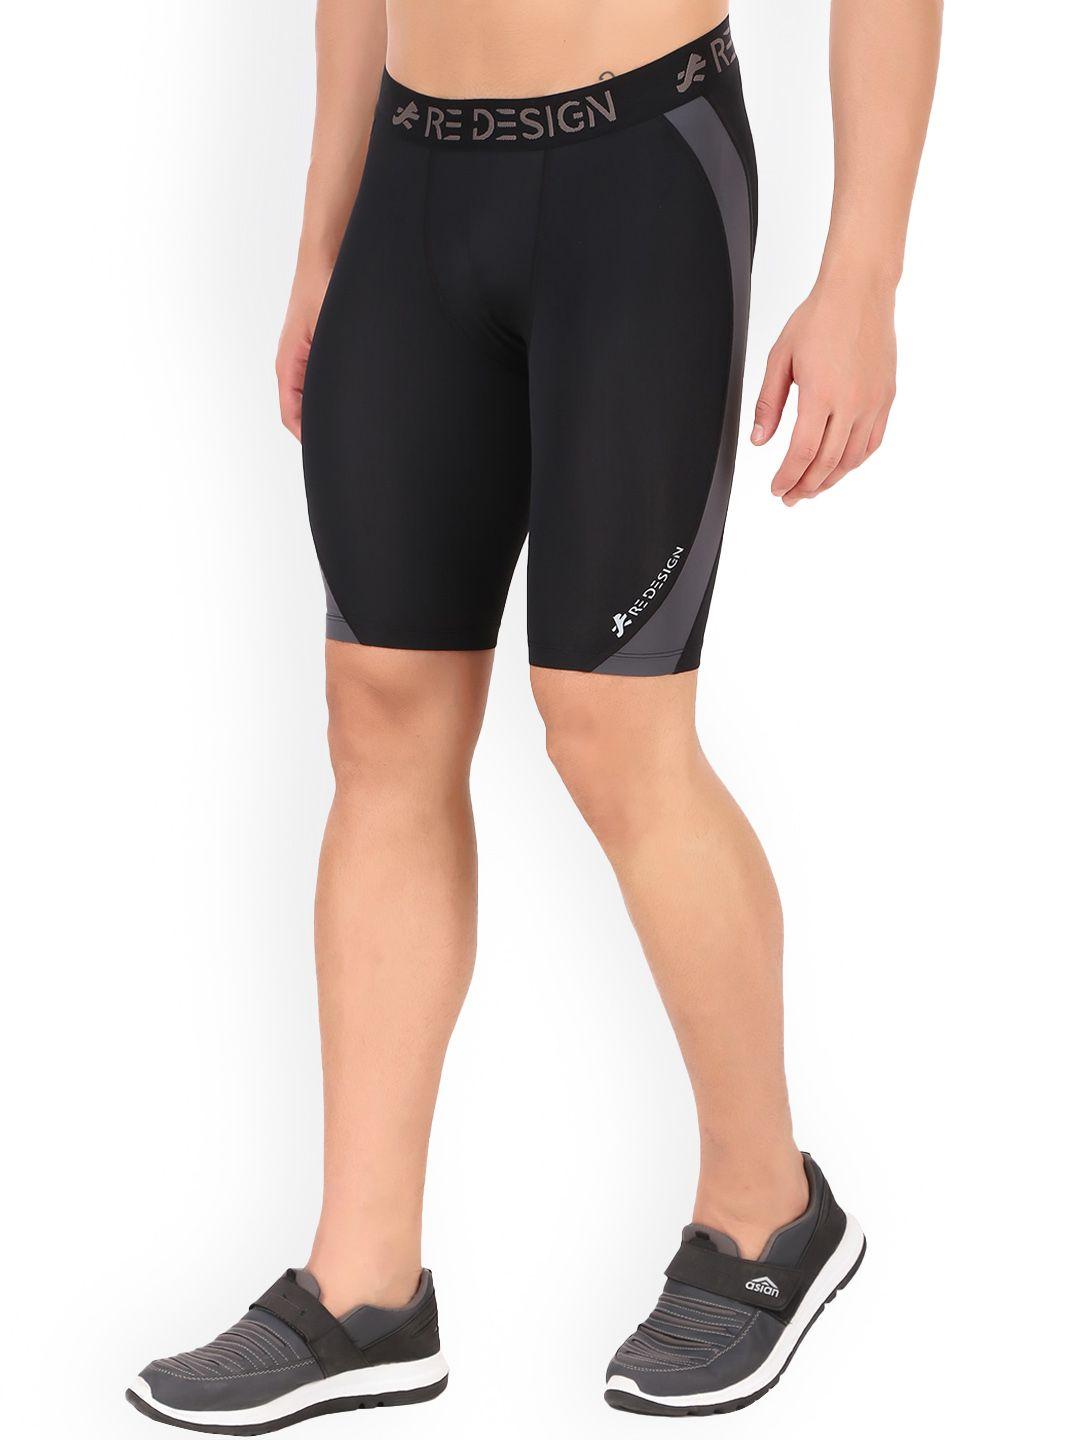 redesign men skinny fit rapid dry sports shorts